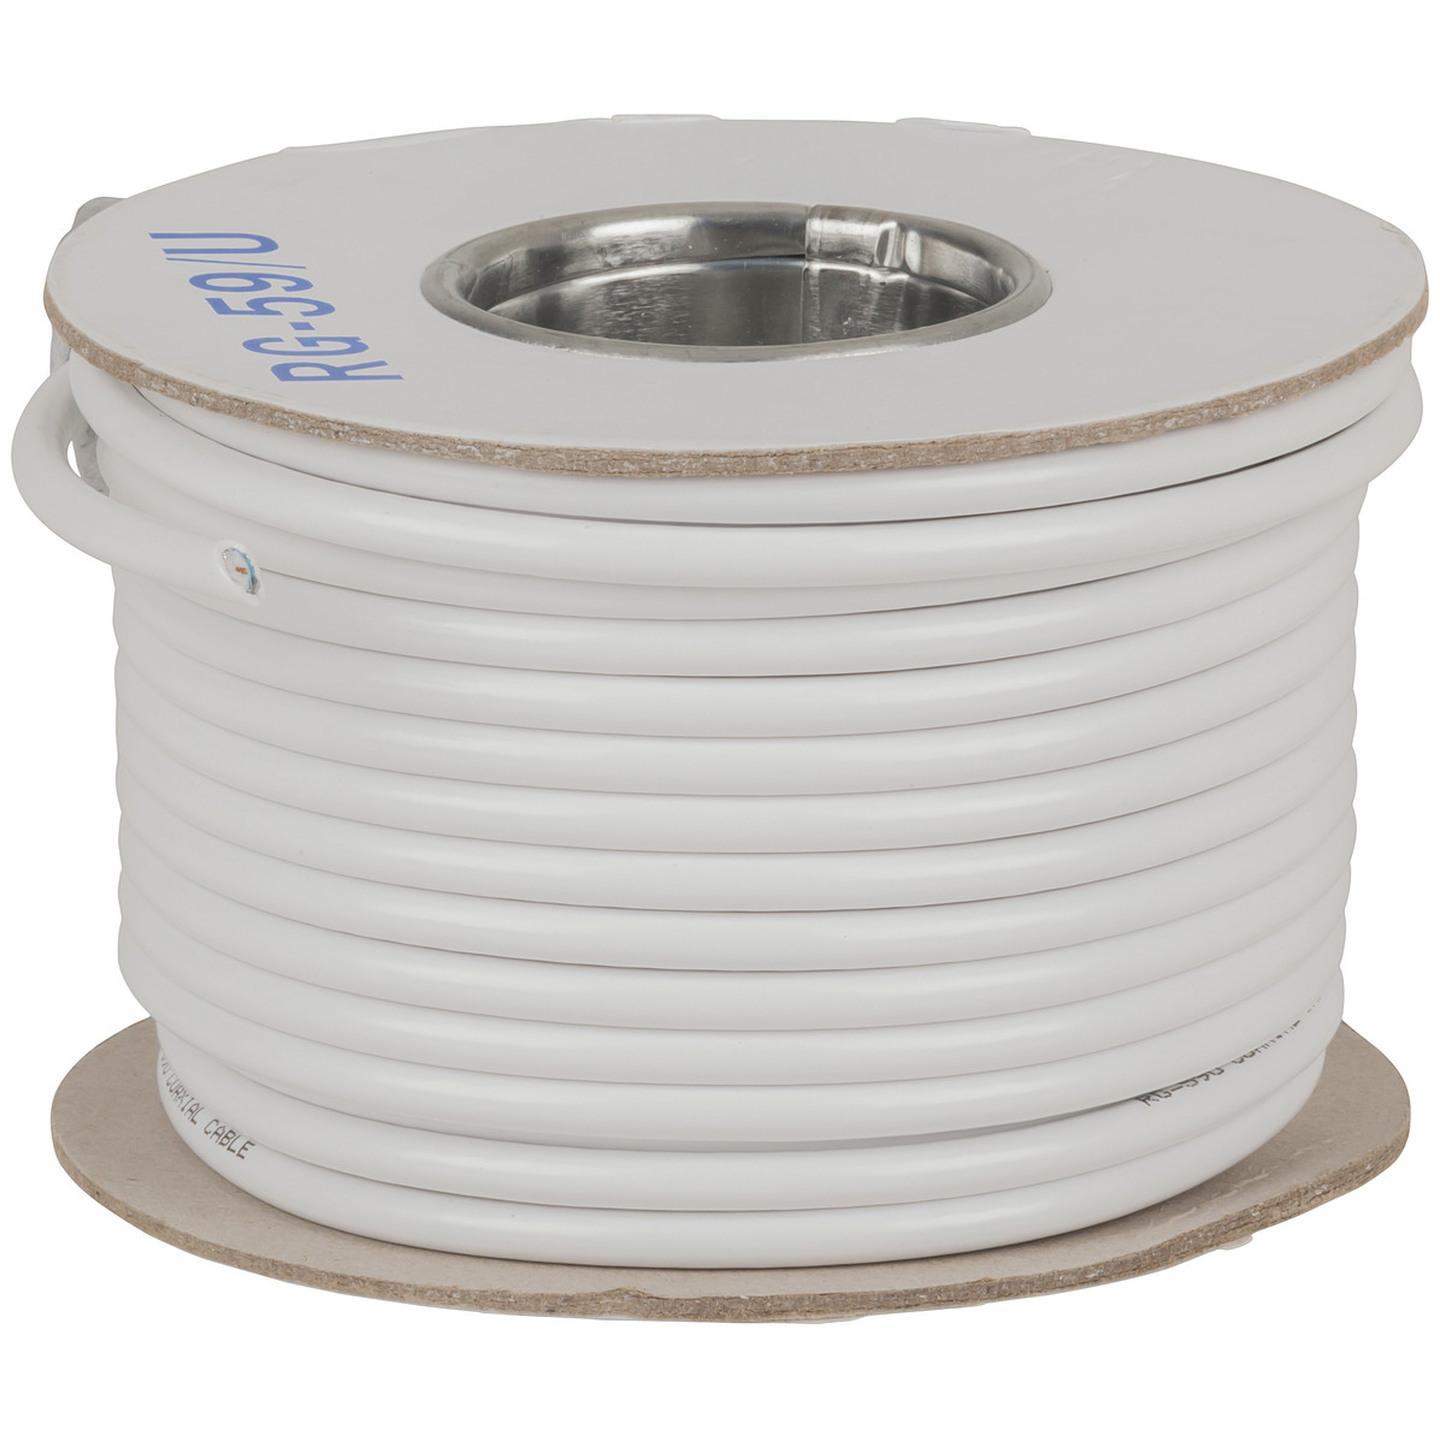 75 Ohm RG59 Coax Cable - White 30m Roll